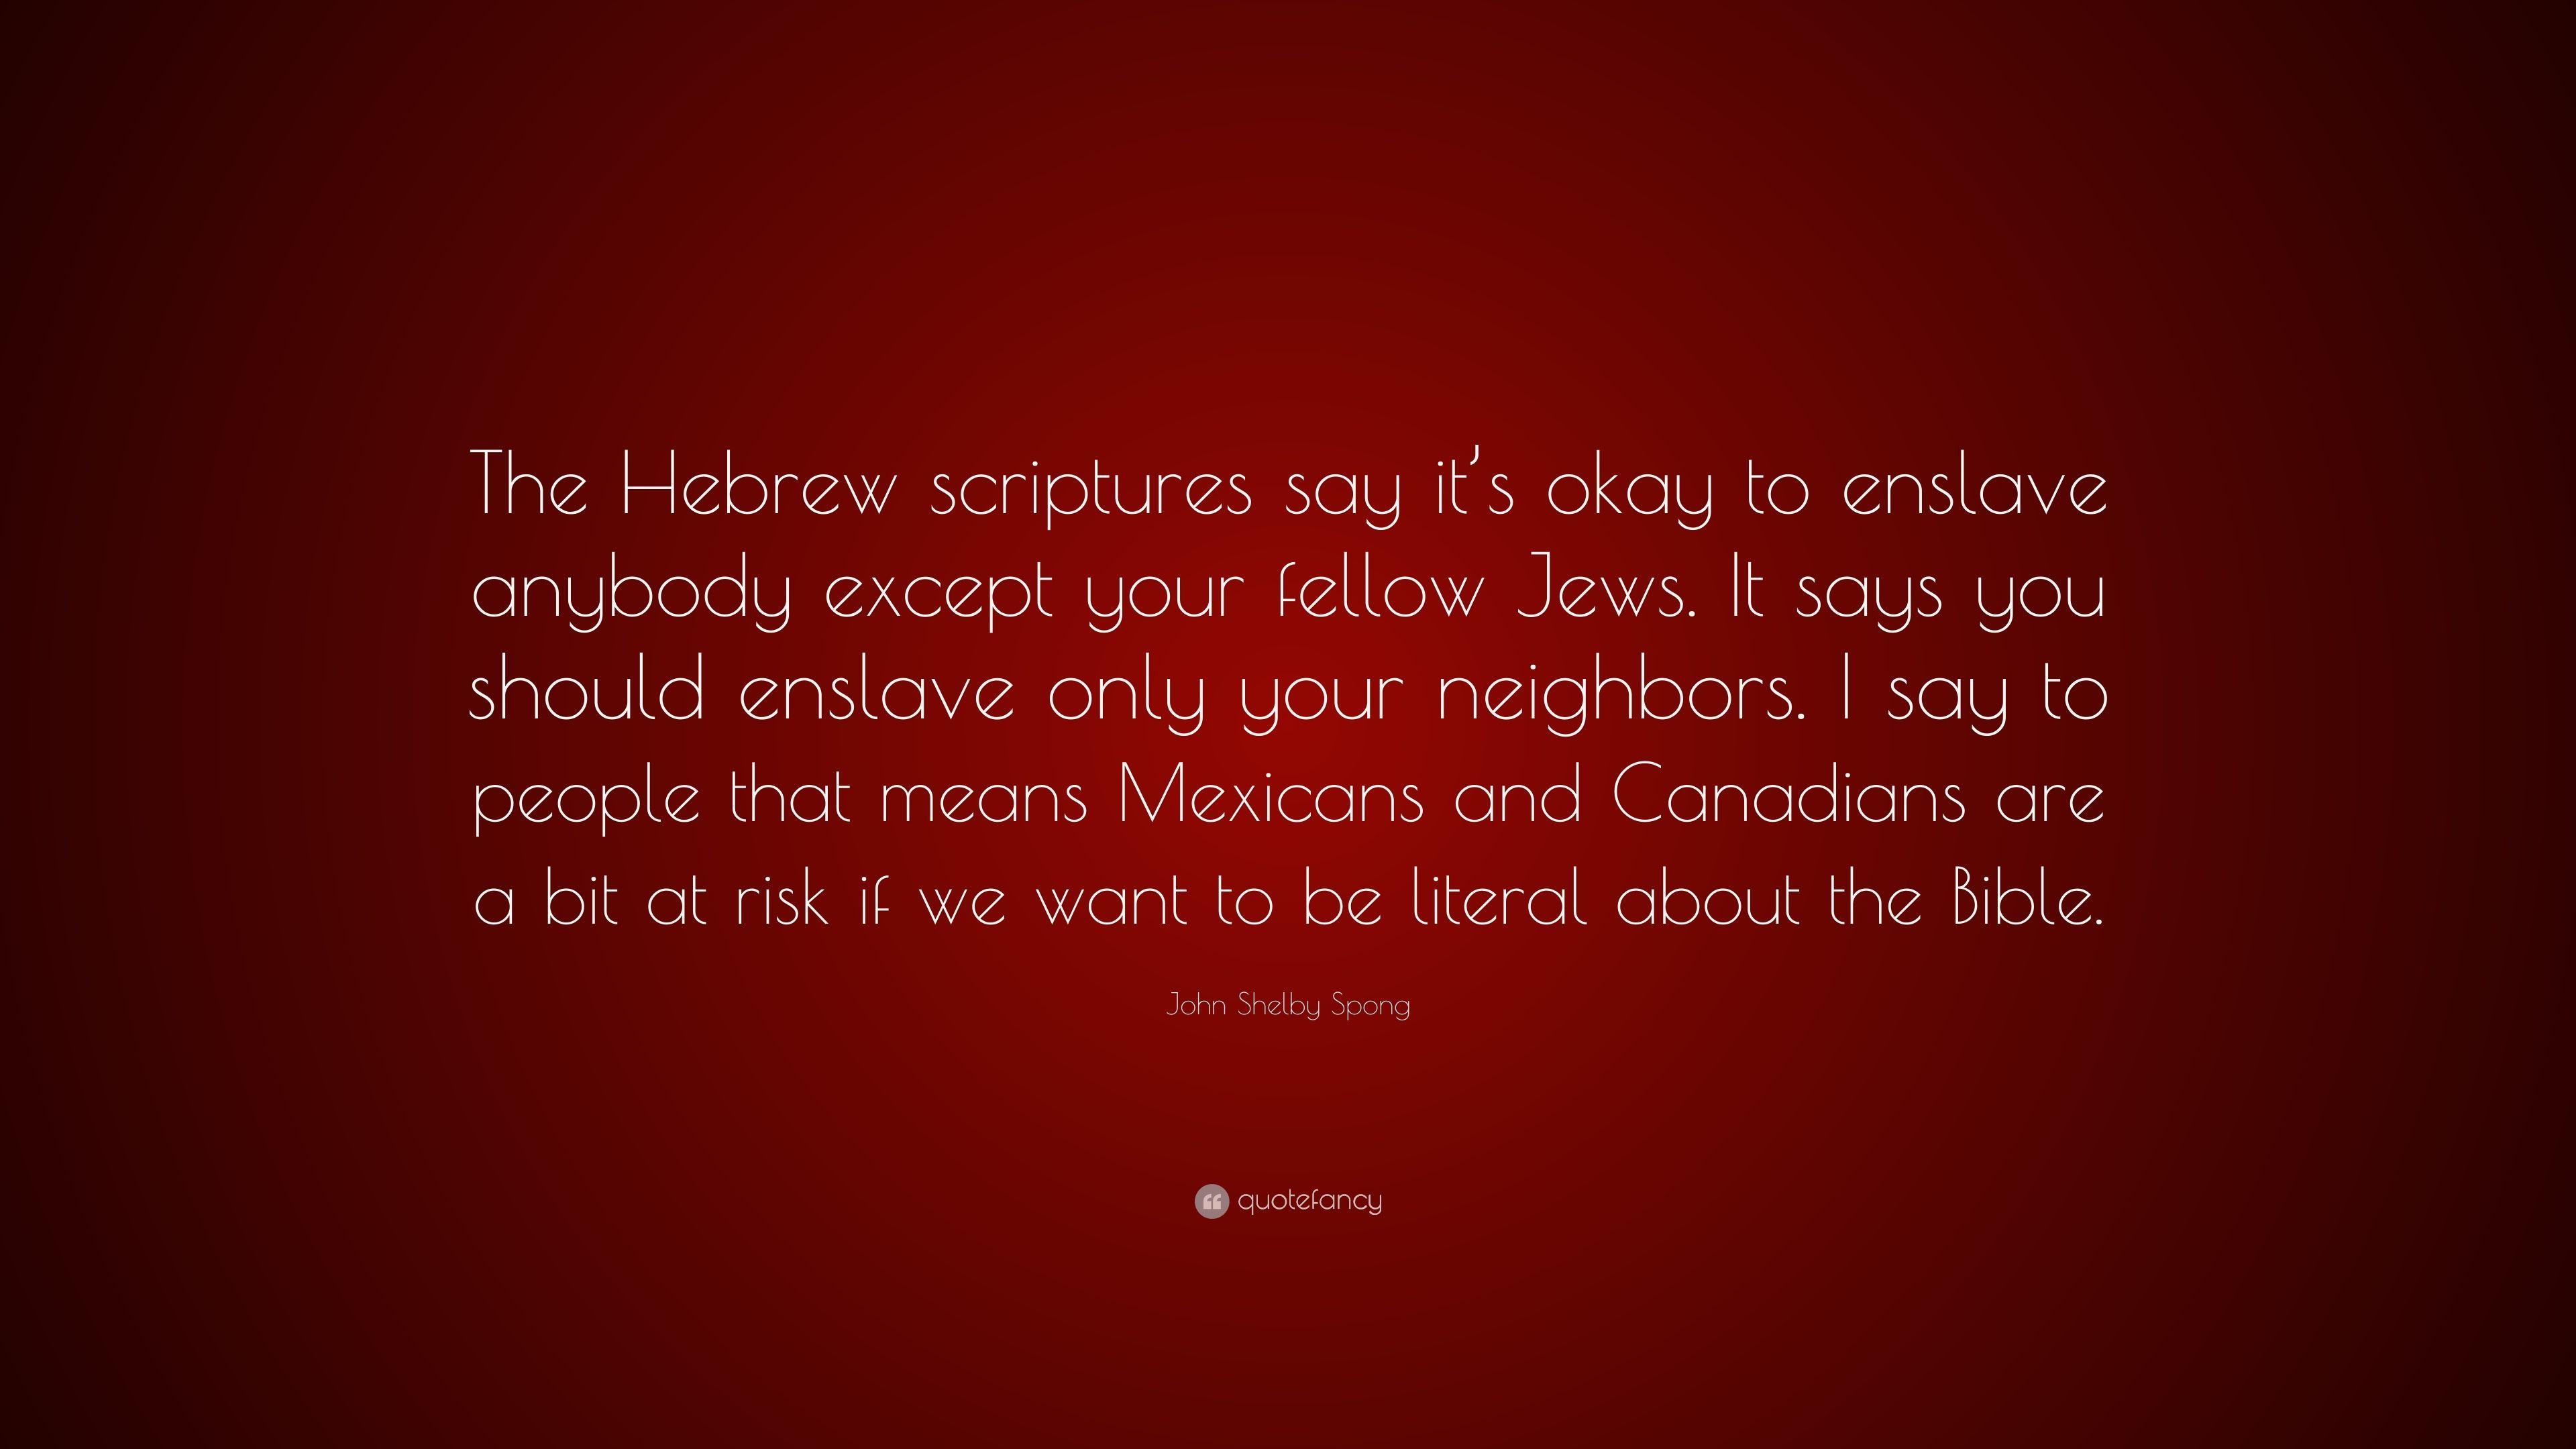 John Shelby Spong Quote: “The Hebrew scriptures say it's okay to